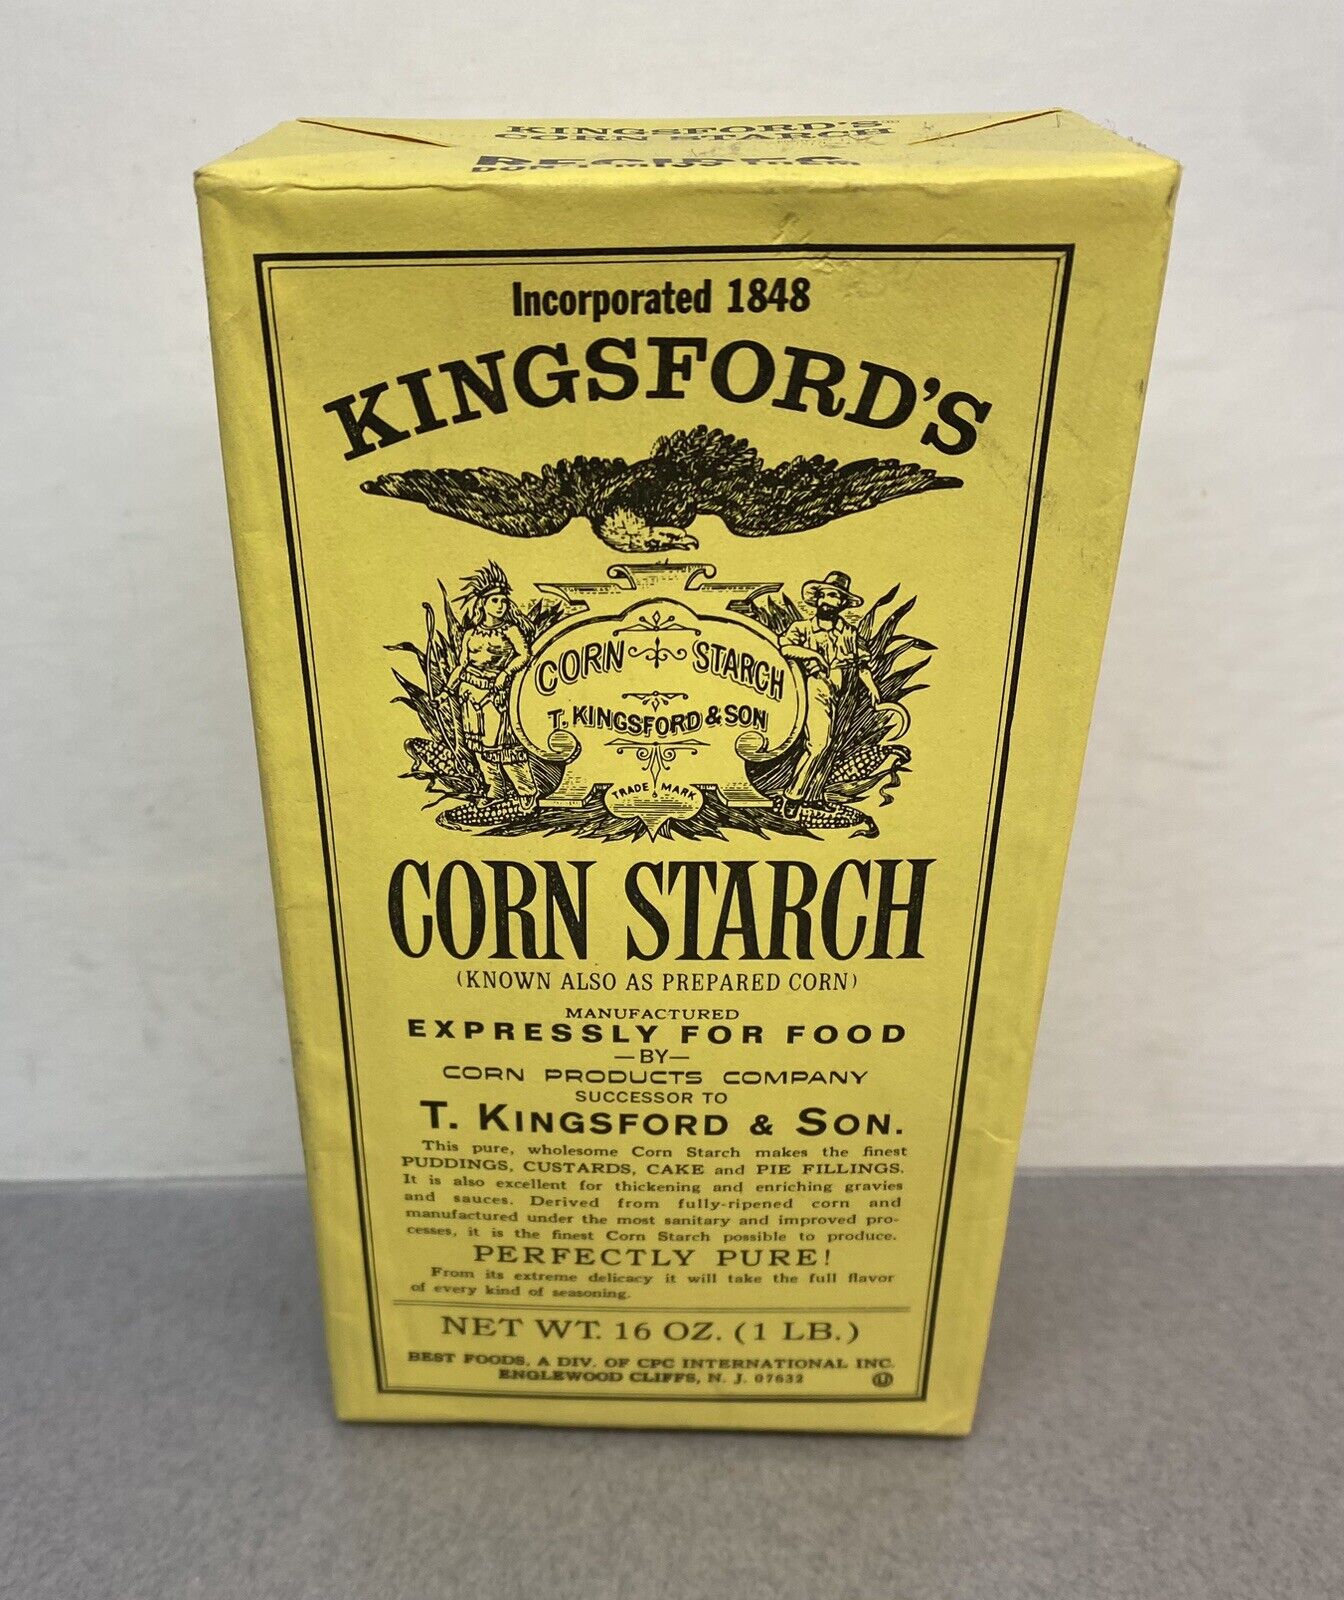 Vintage Kingsford’s Corn Starch Box Still Sealed Grocery Store Prop